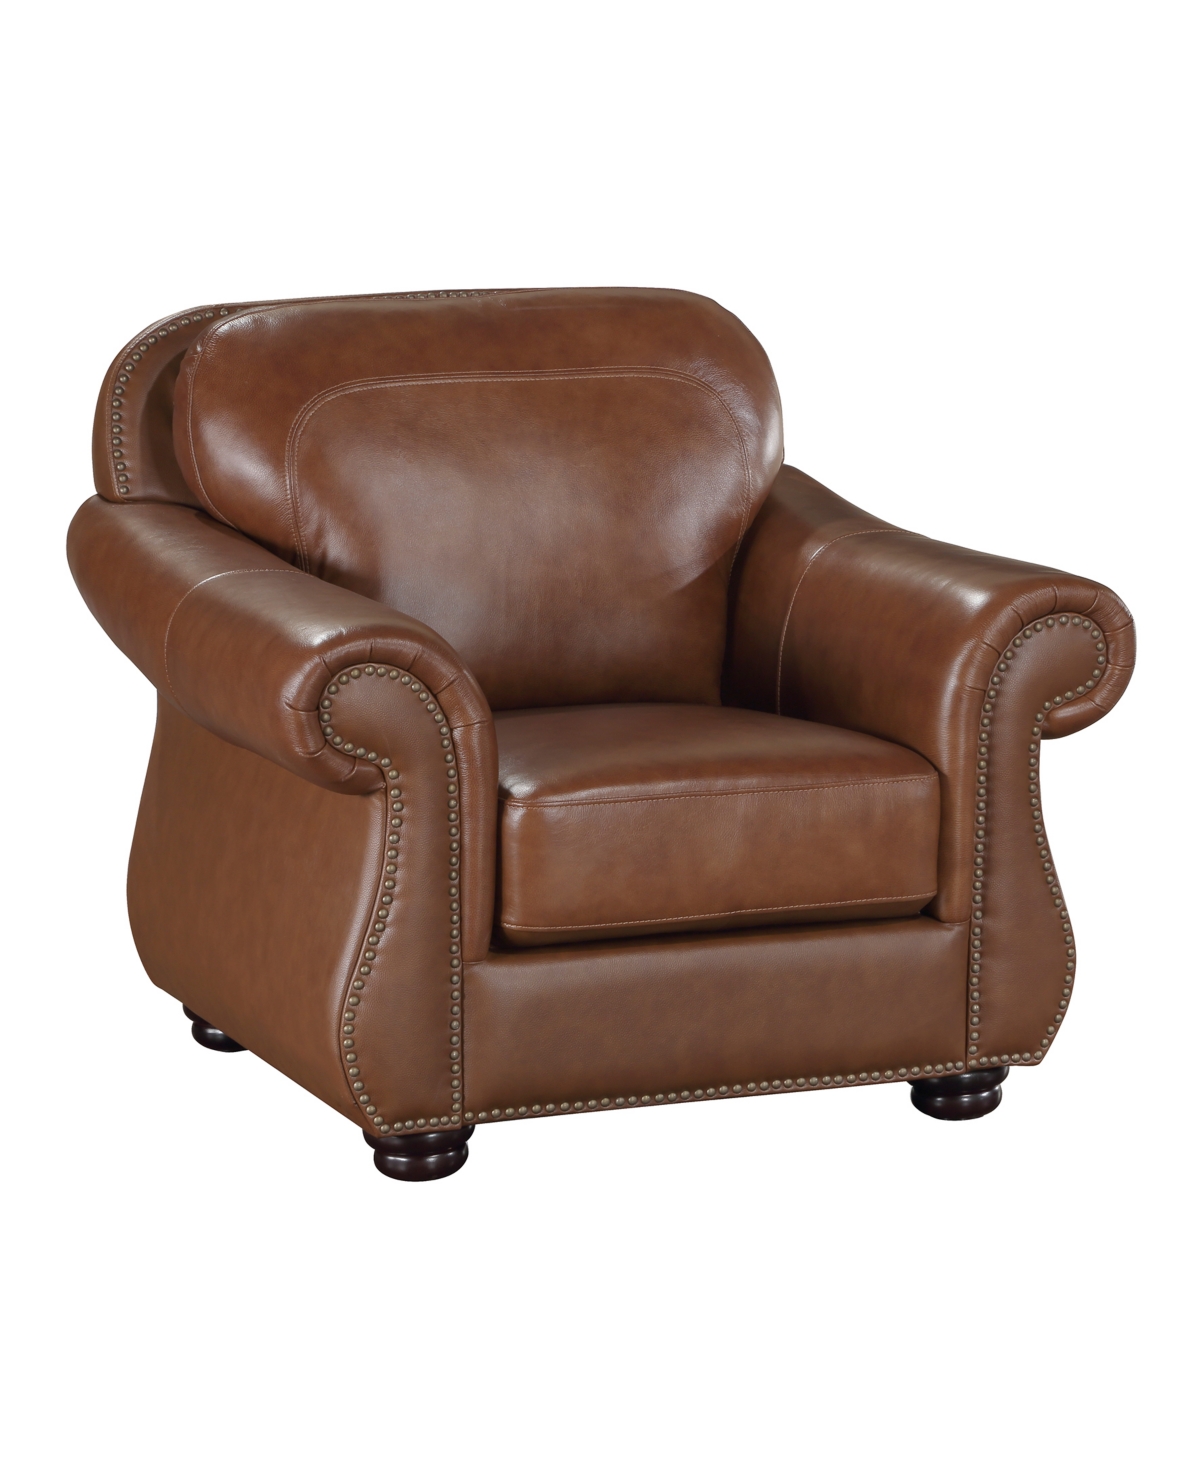 Homelegance White Label Dadeville 42" Leather Match Chair In Camel Brown